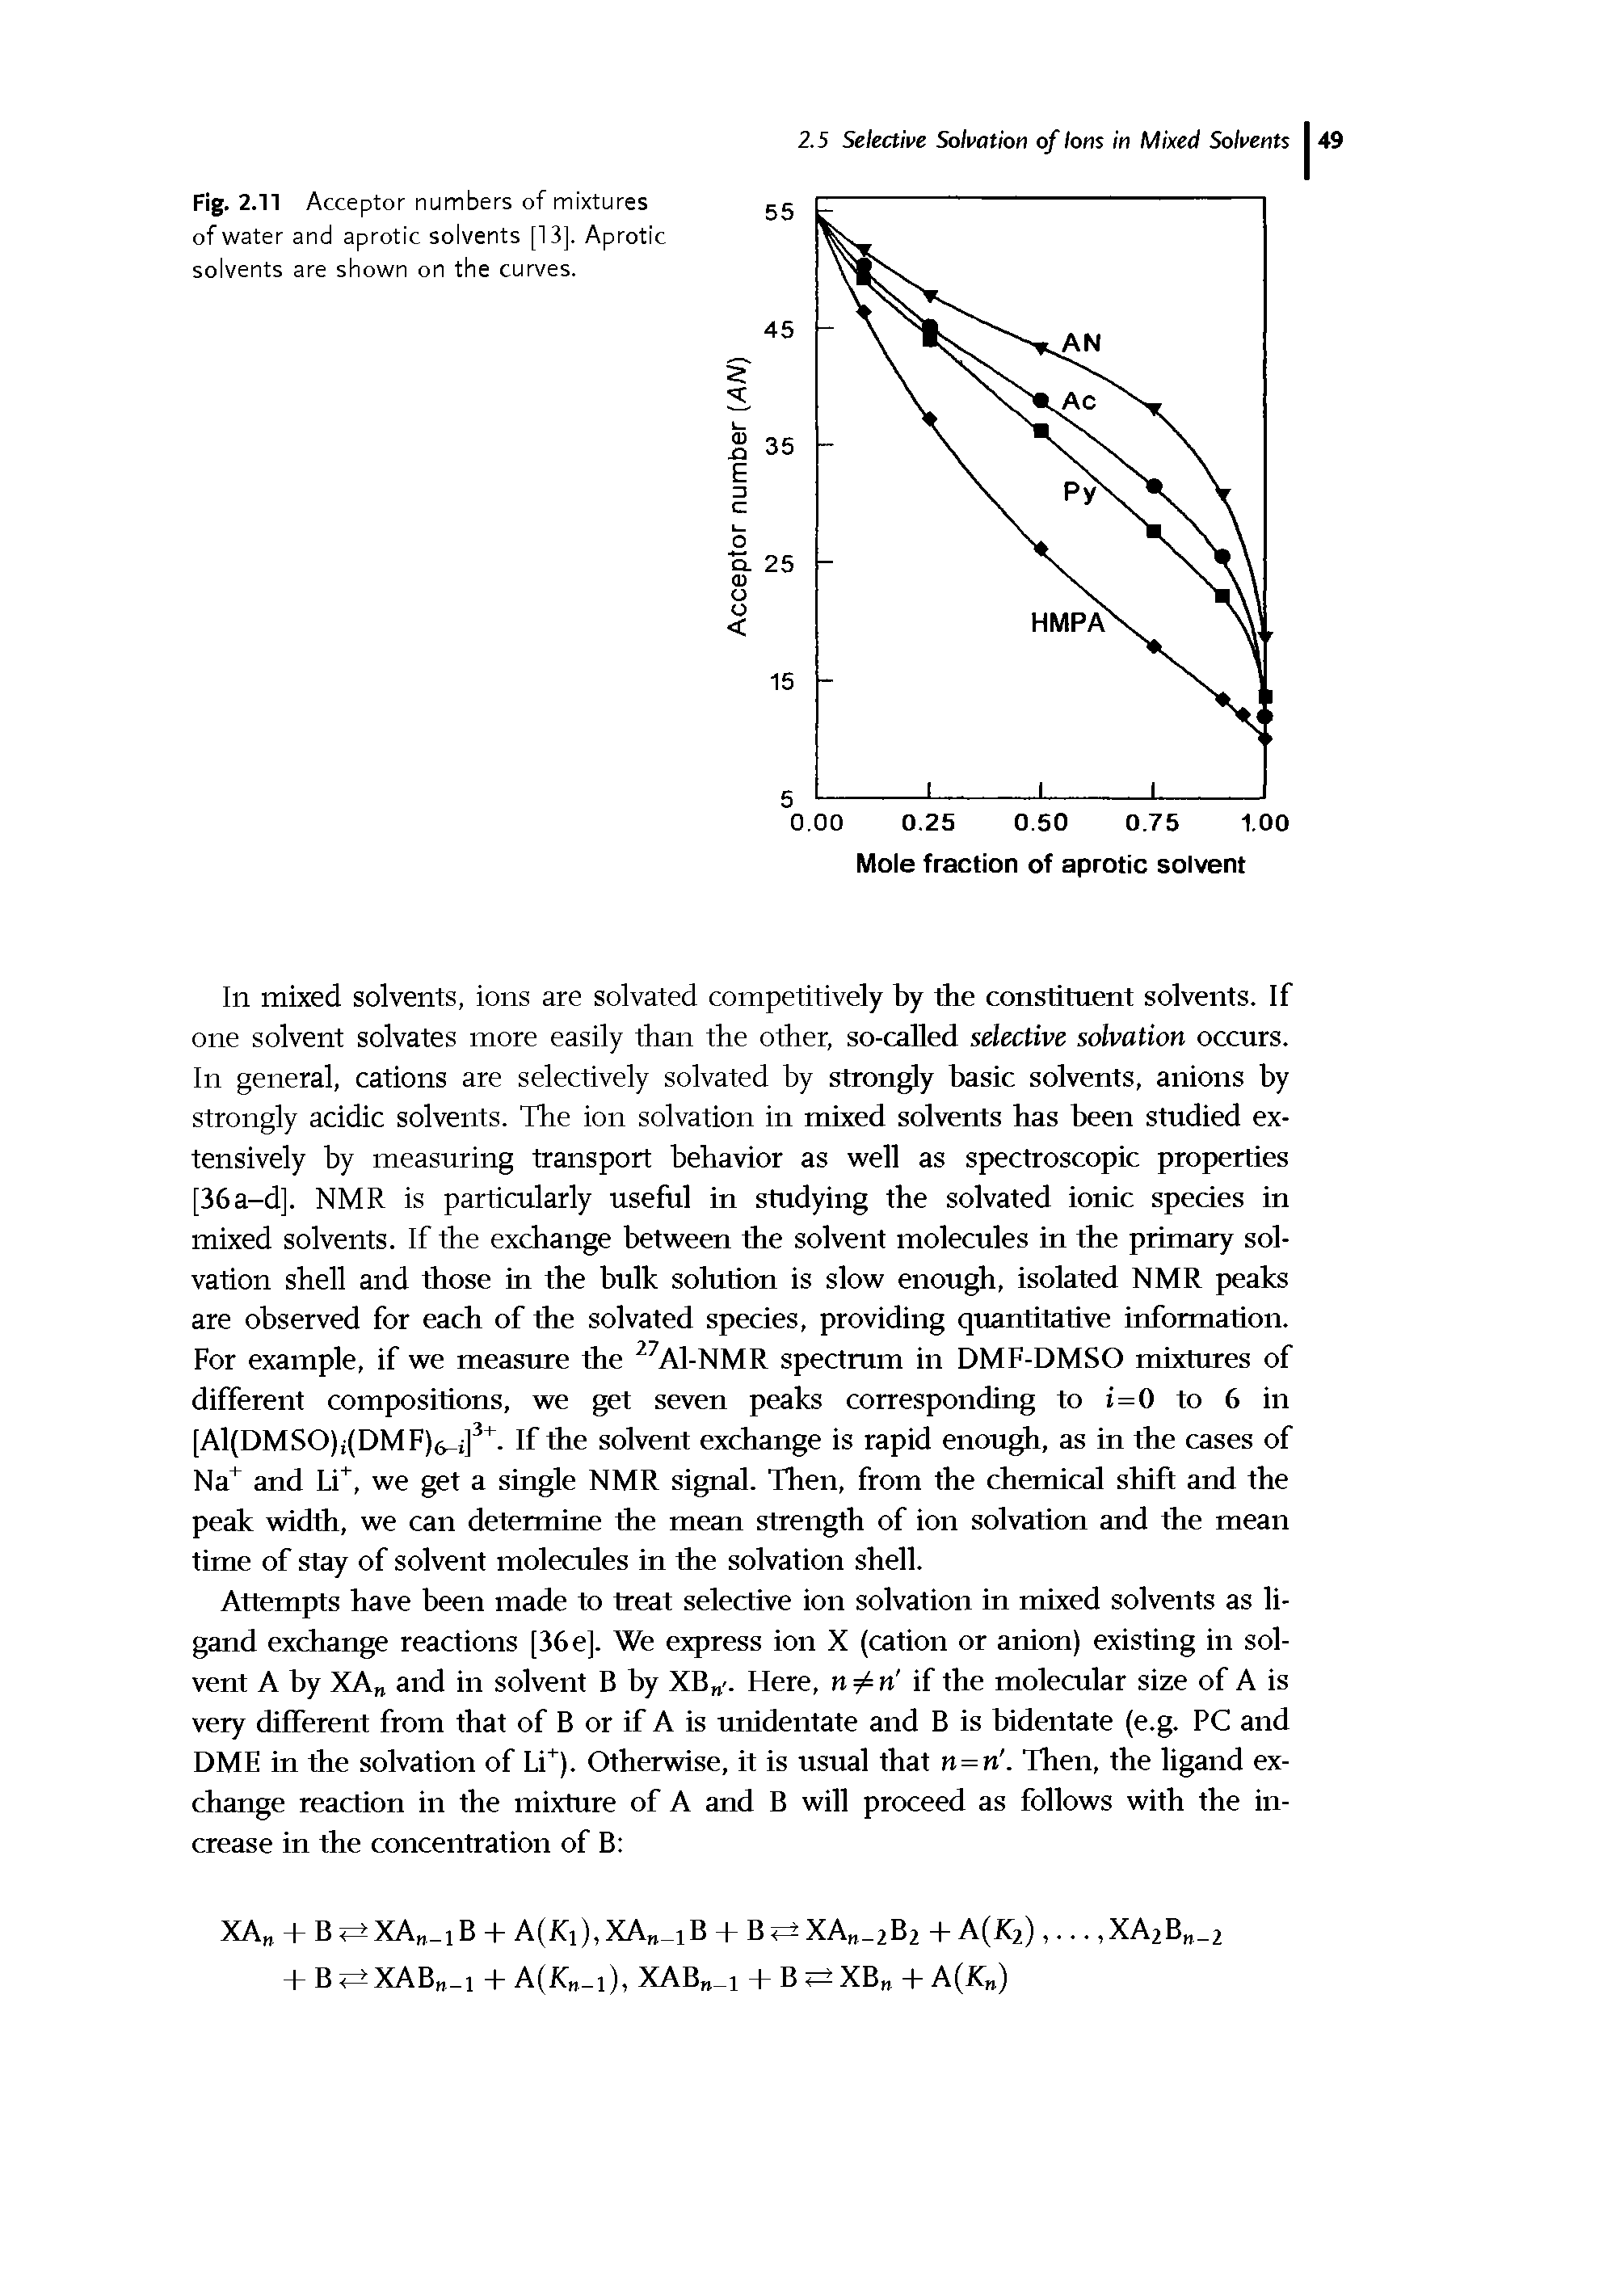 Fig. 2.11 Acceptor numbers of mixtures of water and aprotic solvents [13]. Aprotic solvents are shown on the curves.